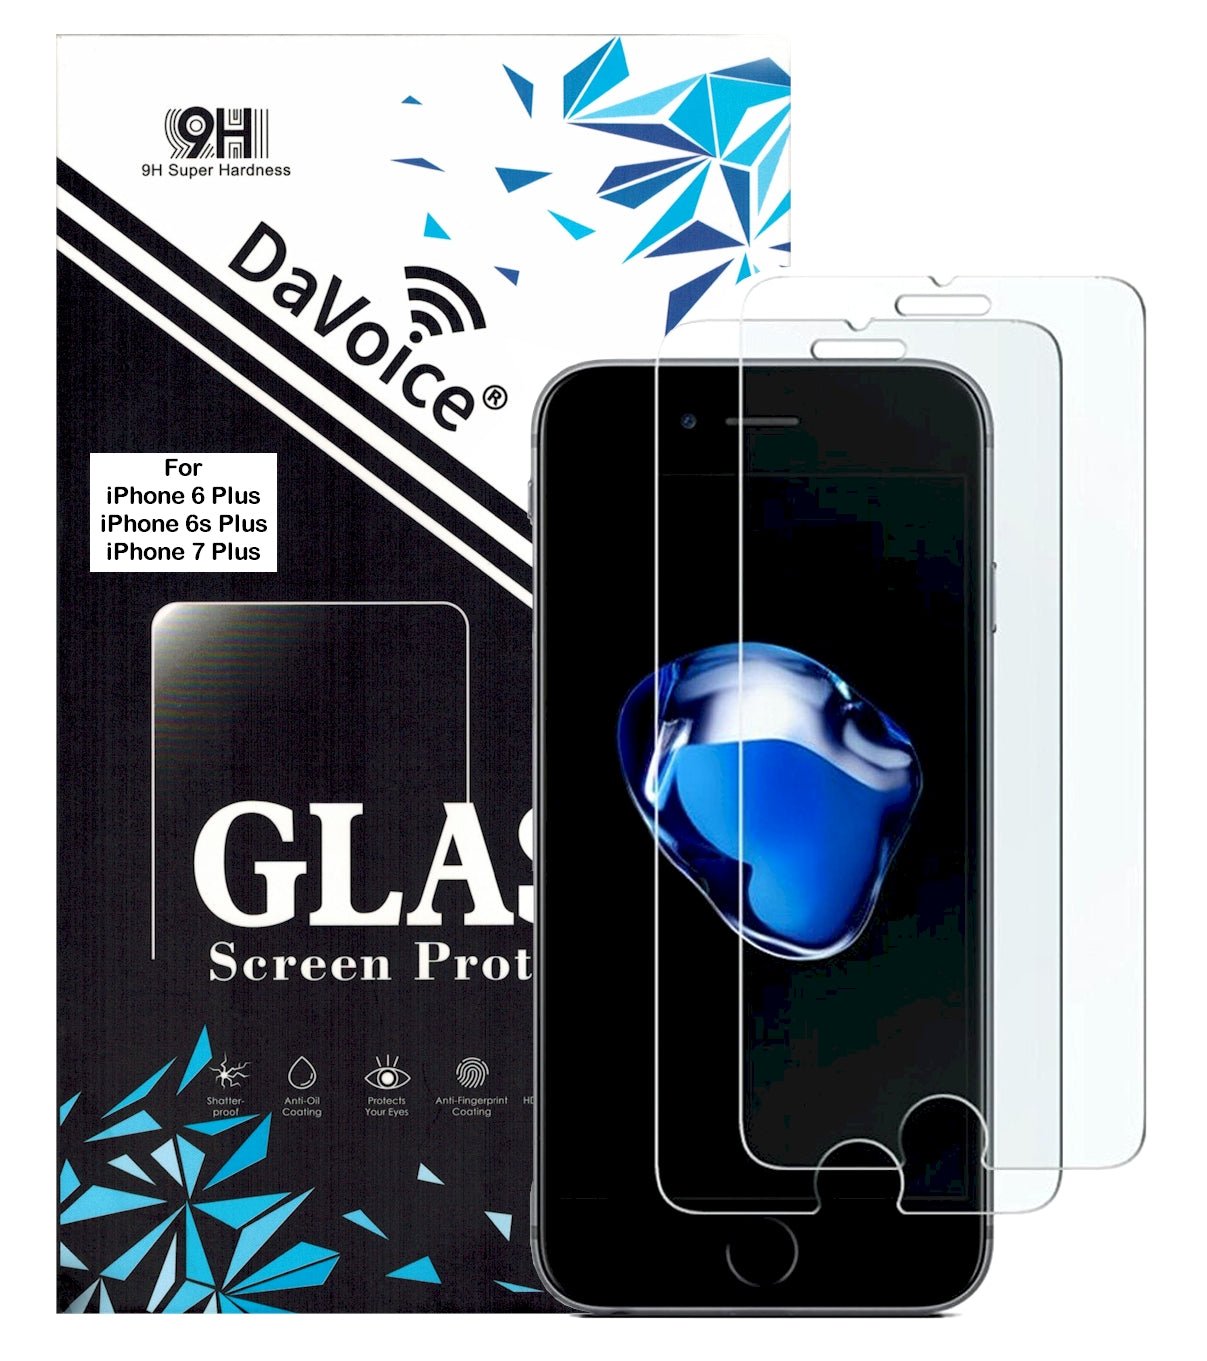 iPhone 7 Plus Screen Protector, 6s Plus Protector –